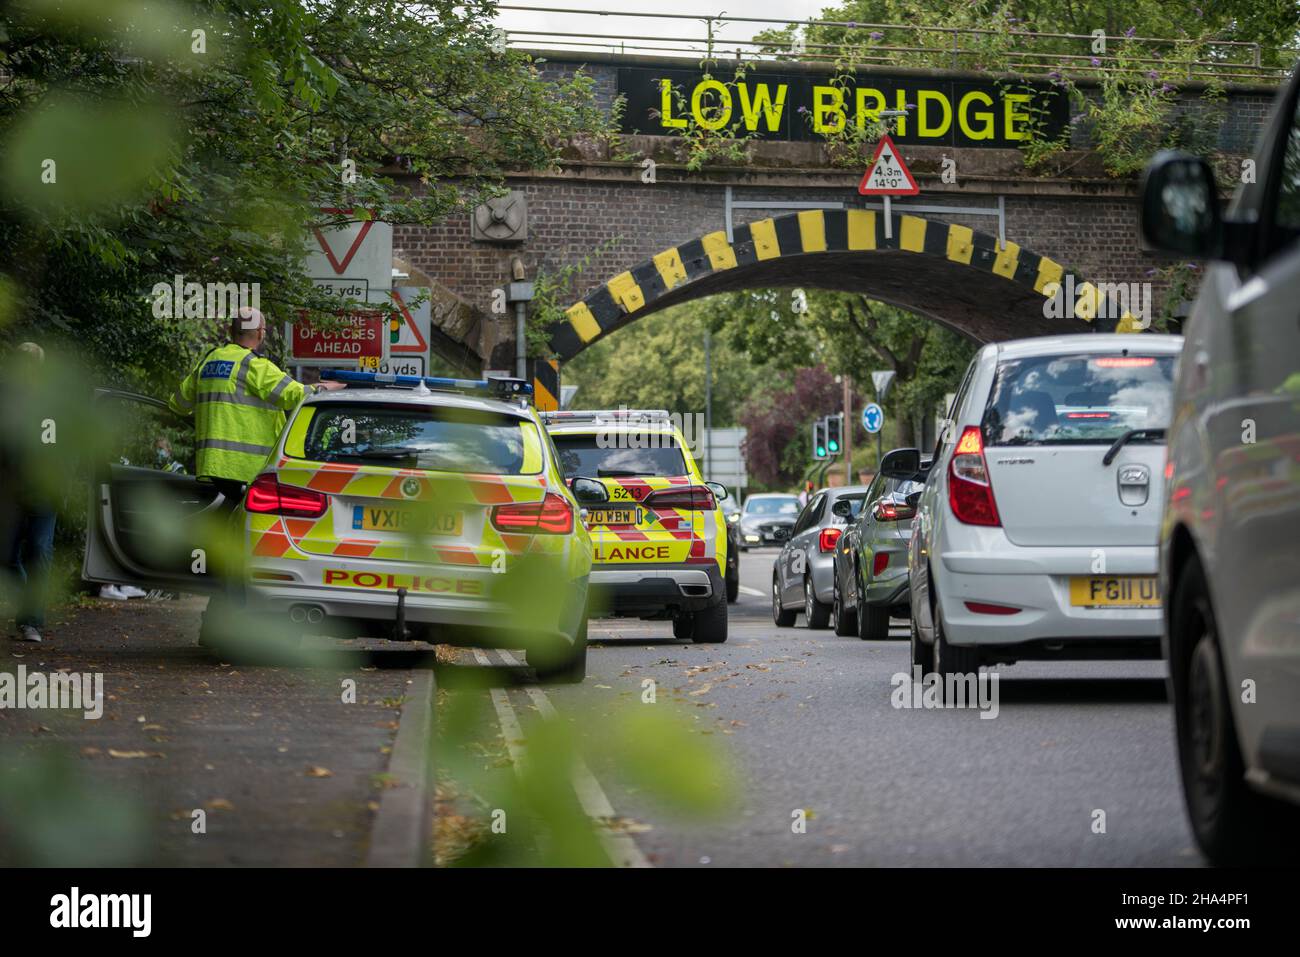 Warwickshire Police and West Midlands Ambulance Service at a low bridge strike in Leamington Spa Stock Photo